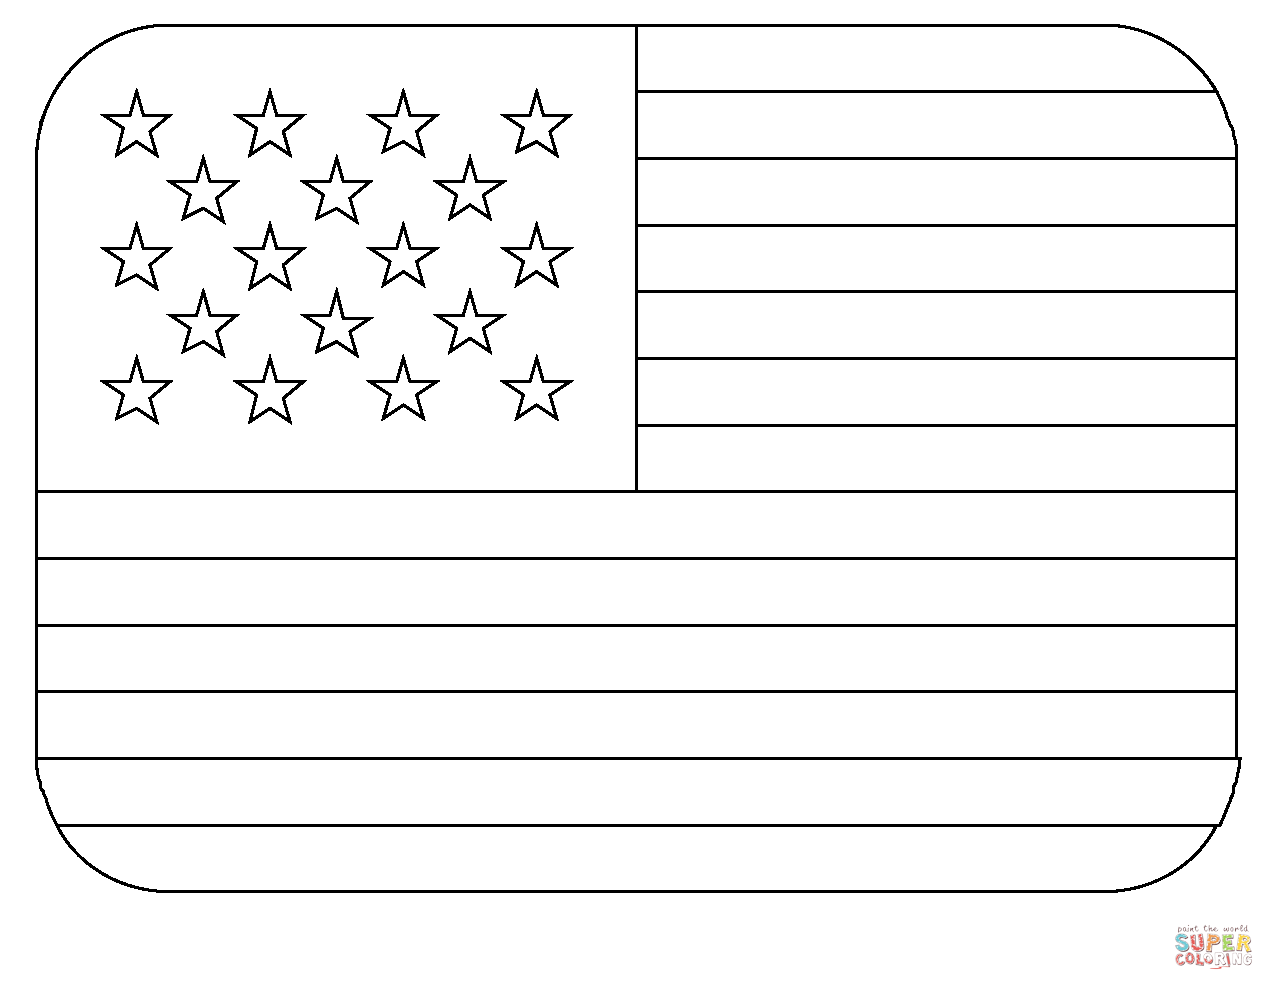 Flag of united states emoji coloring page free printable coloring pages